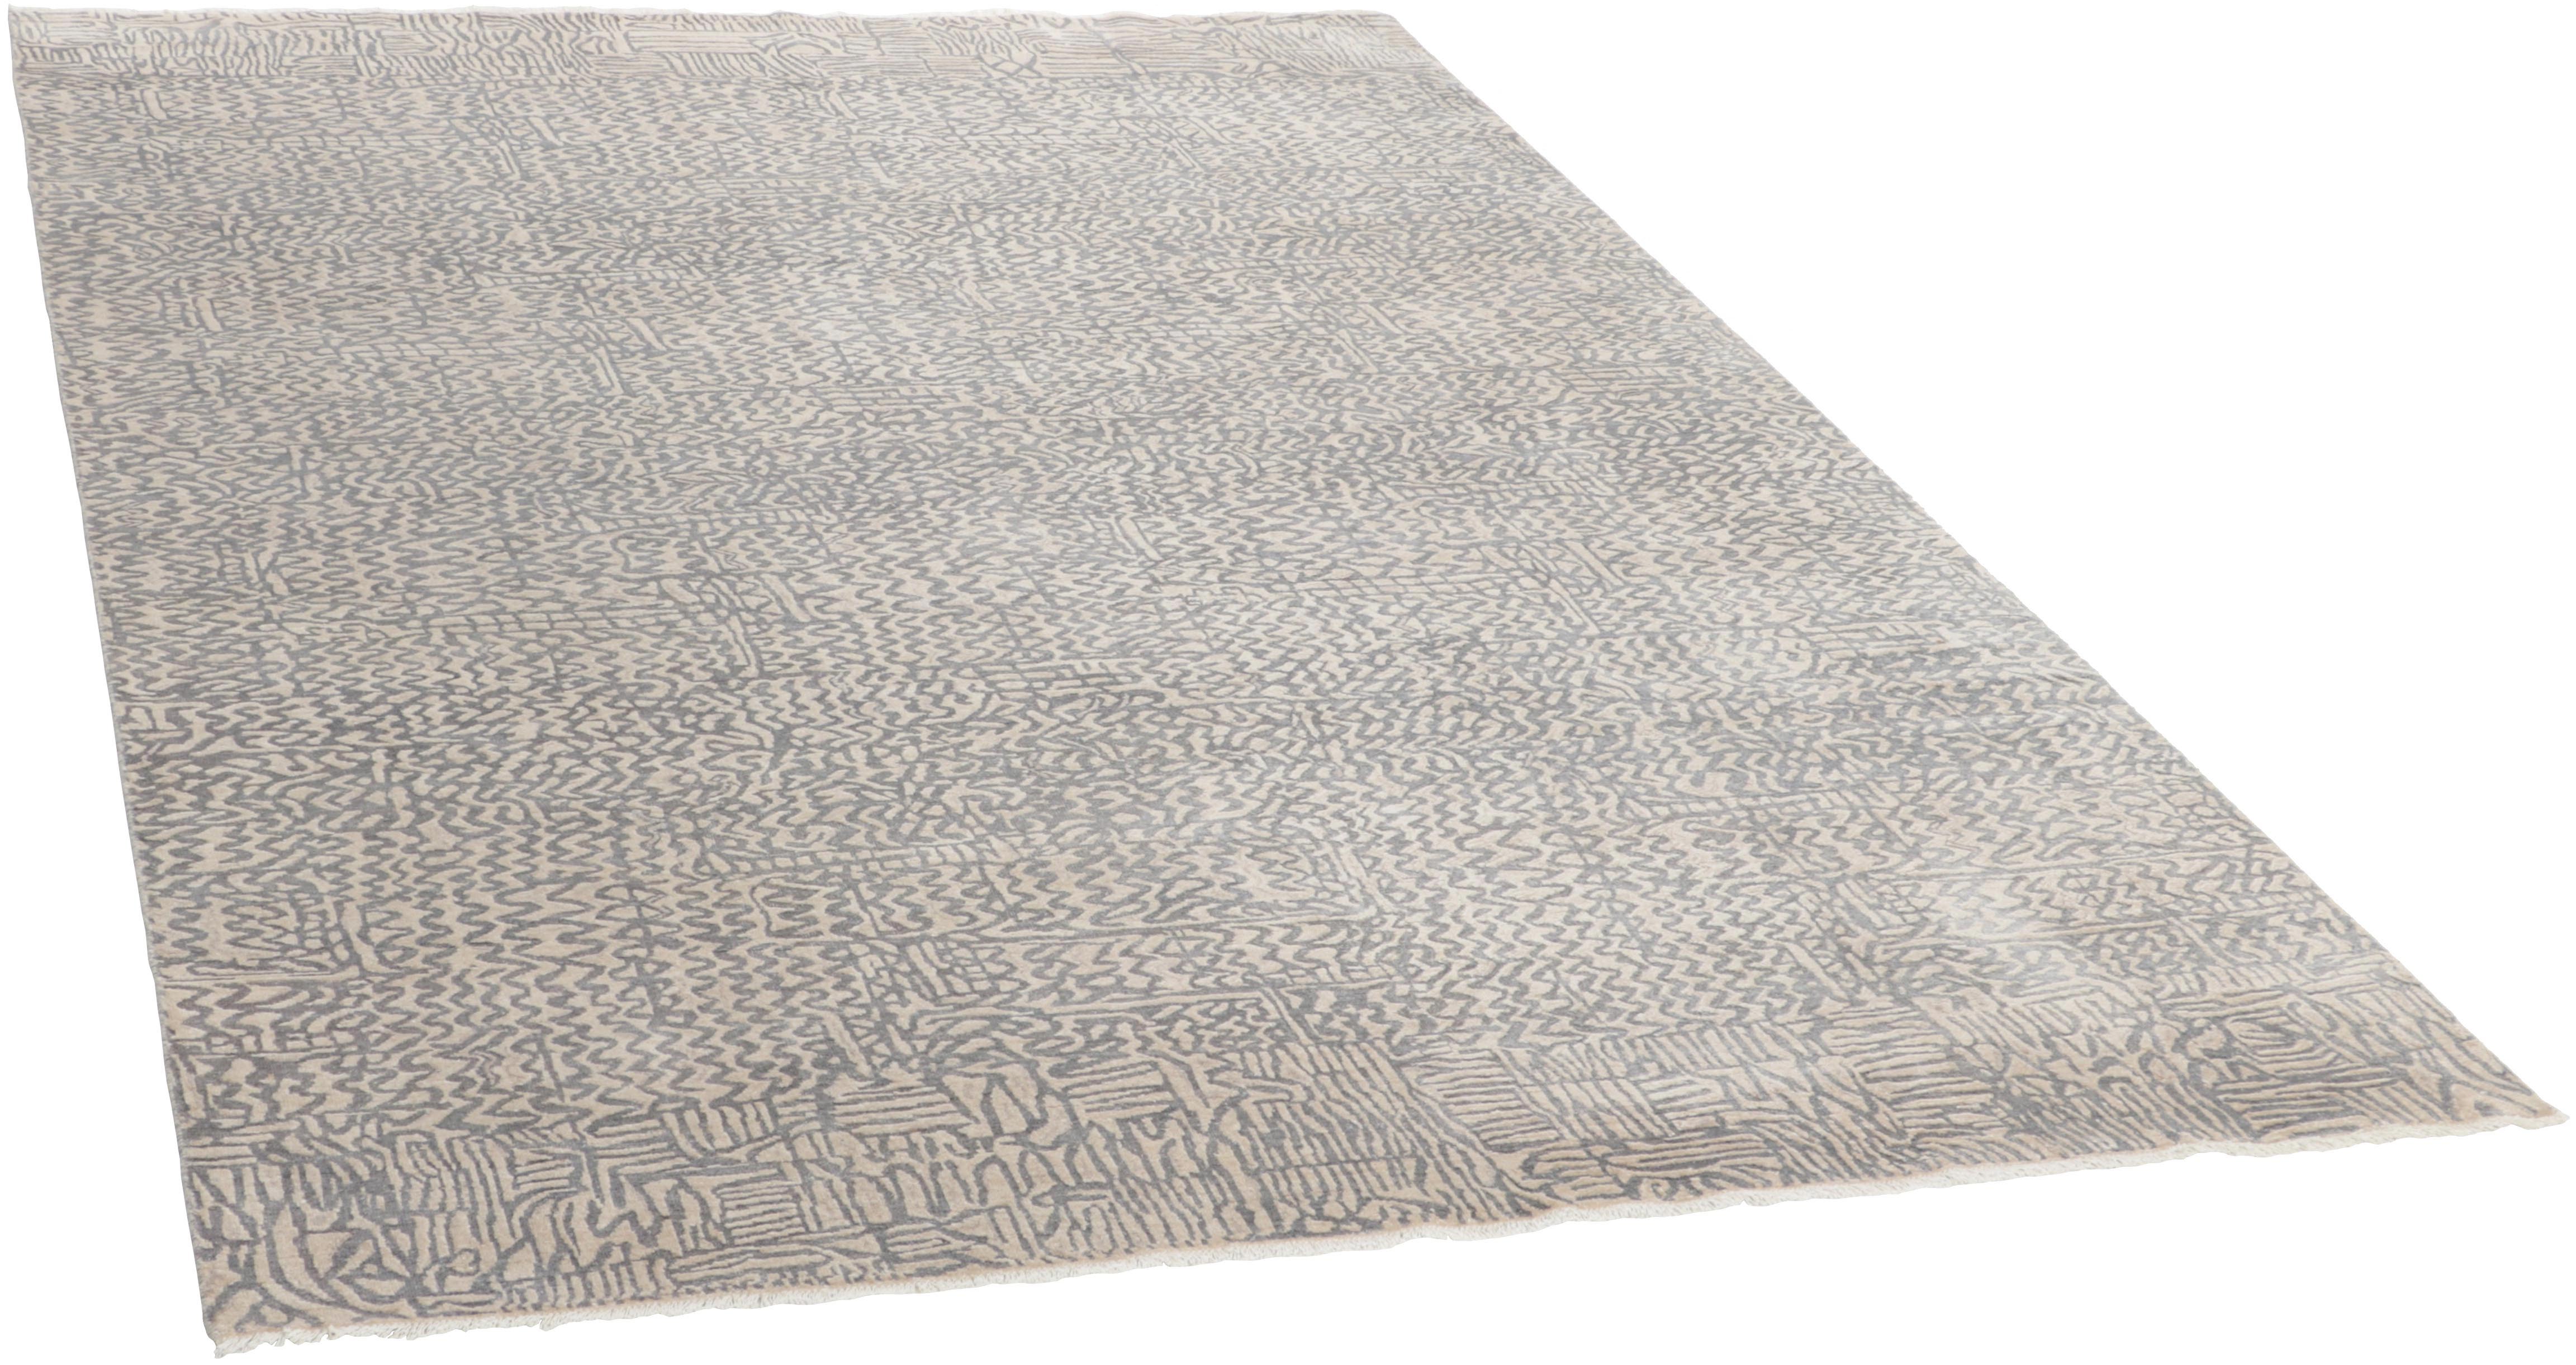 Authentic oriental rug with a damask pattern in beige